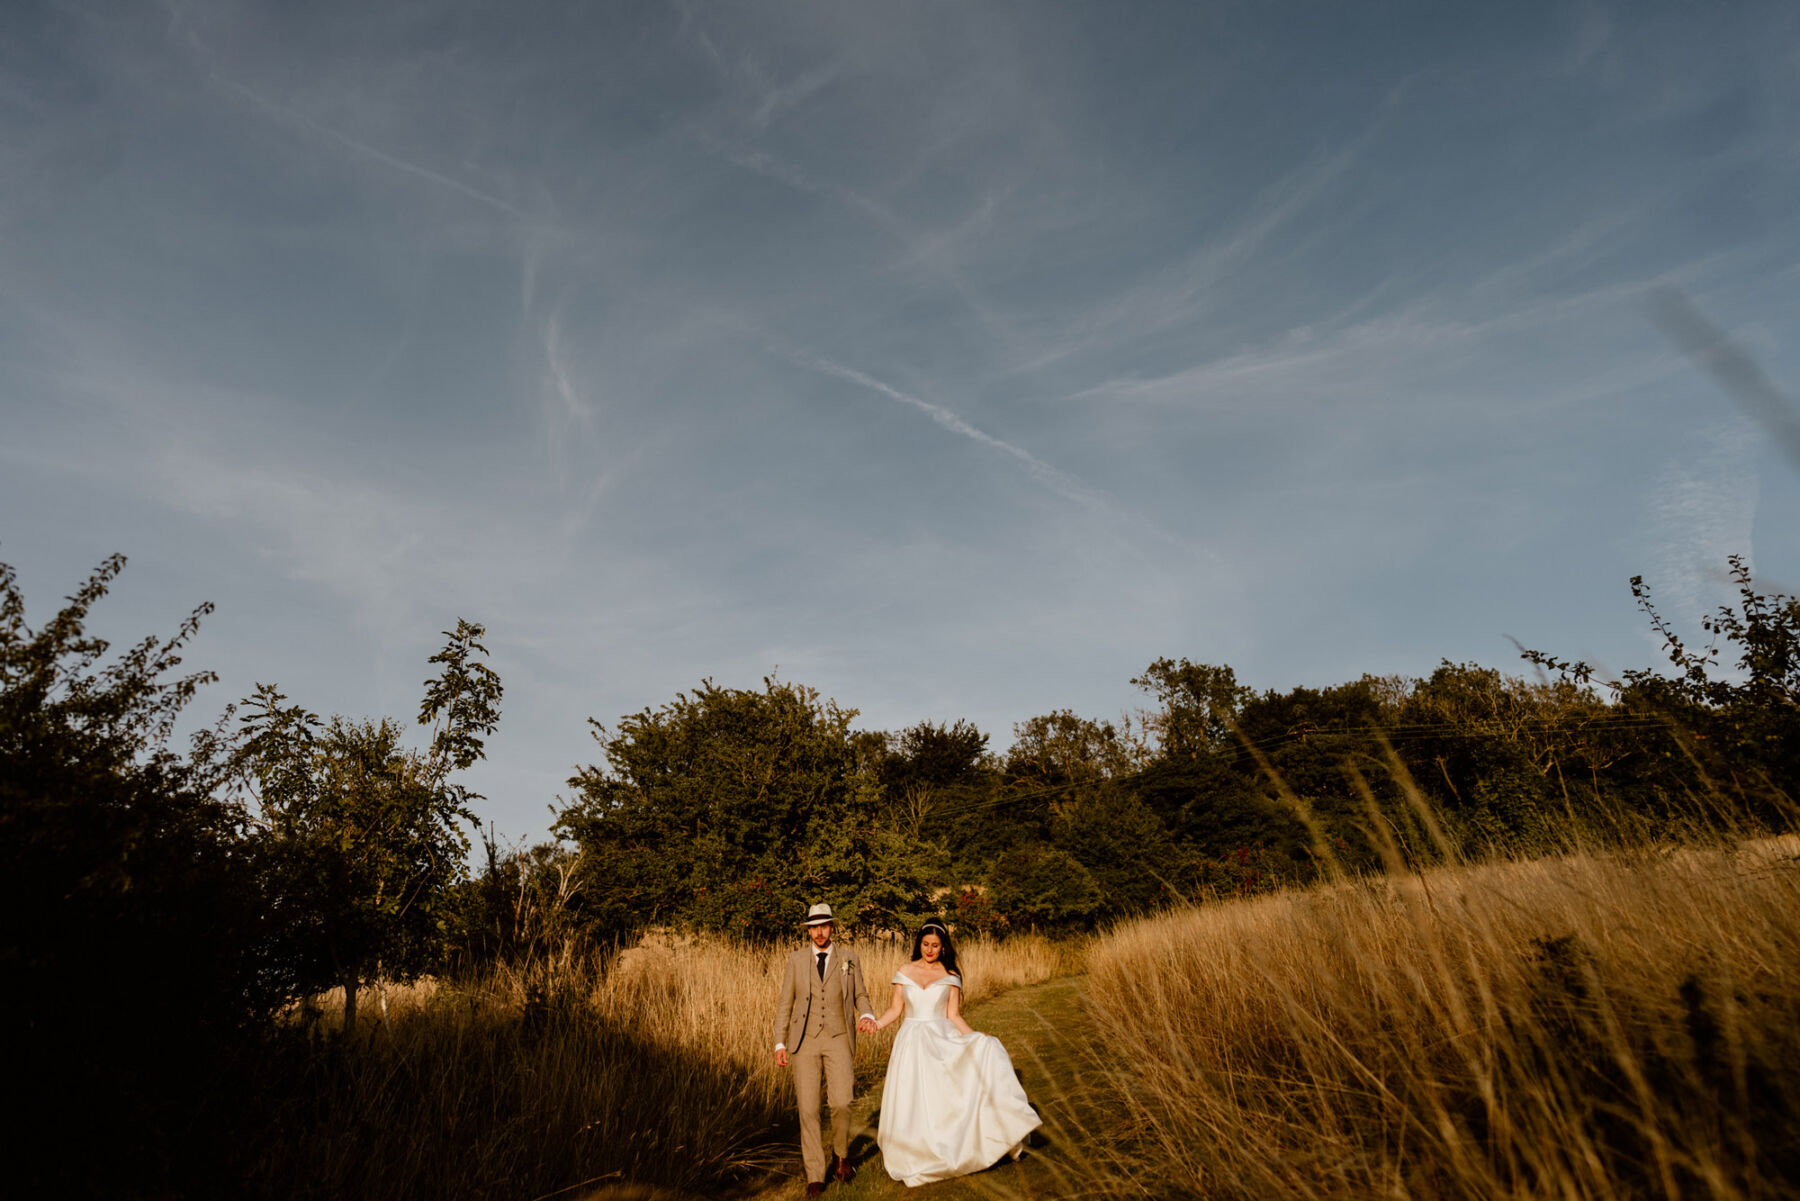 Suzanne Neville bride + groom in pale suit in meadow with tall grasses.